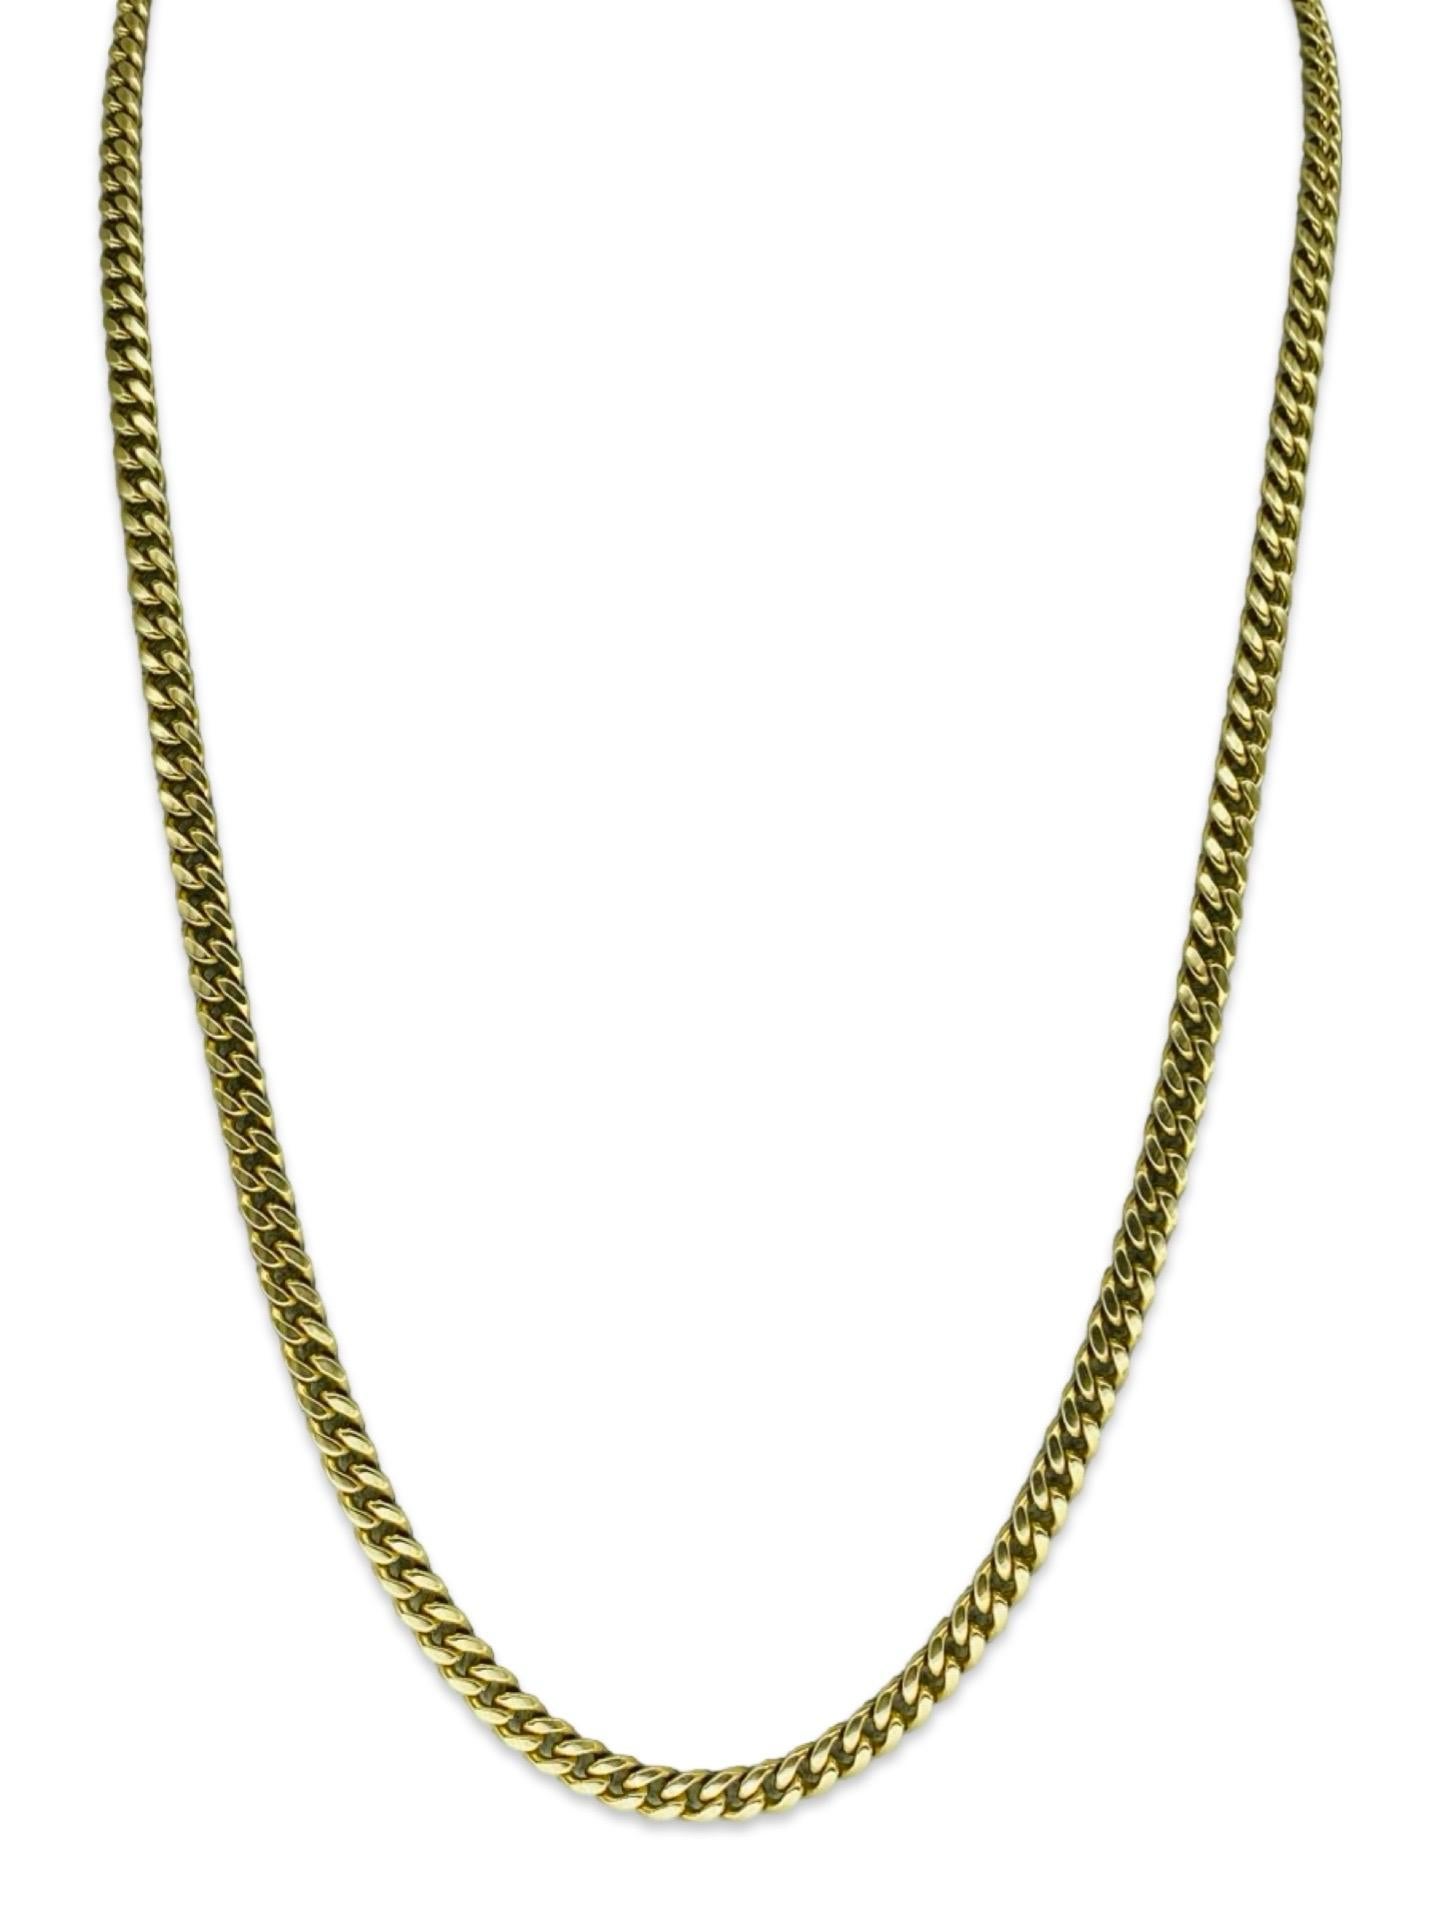 Vintage 5.25mm thickness Cuban Link Chain. Very elegant chain cuban links comfortable on neck. The chain measures 24 Inches in length and weights 47g
Stamped KA1772 
Circa 1980s